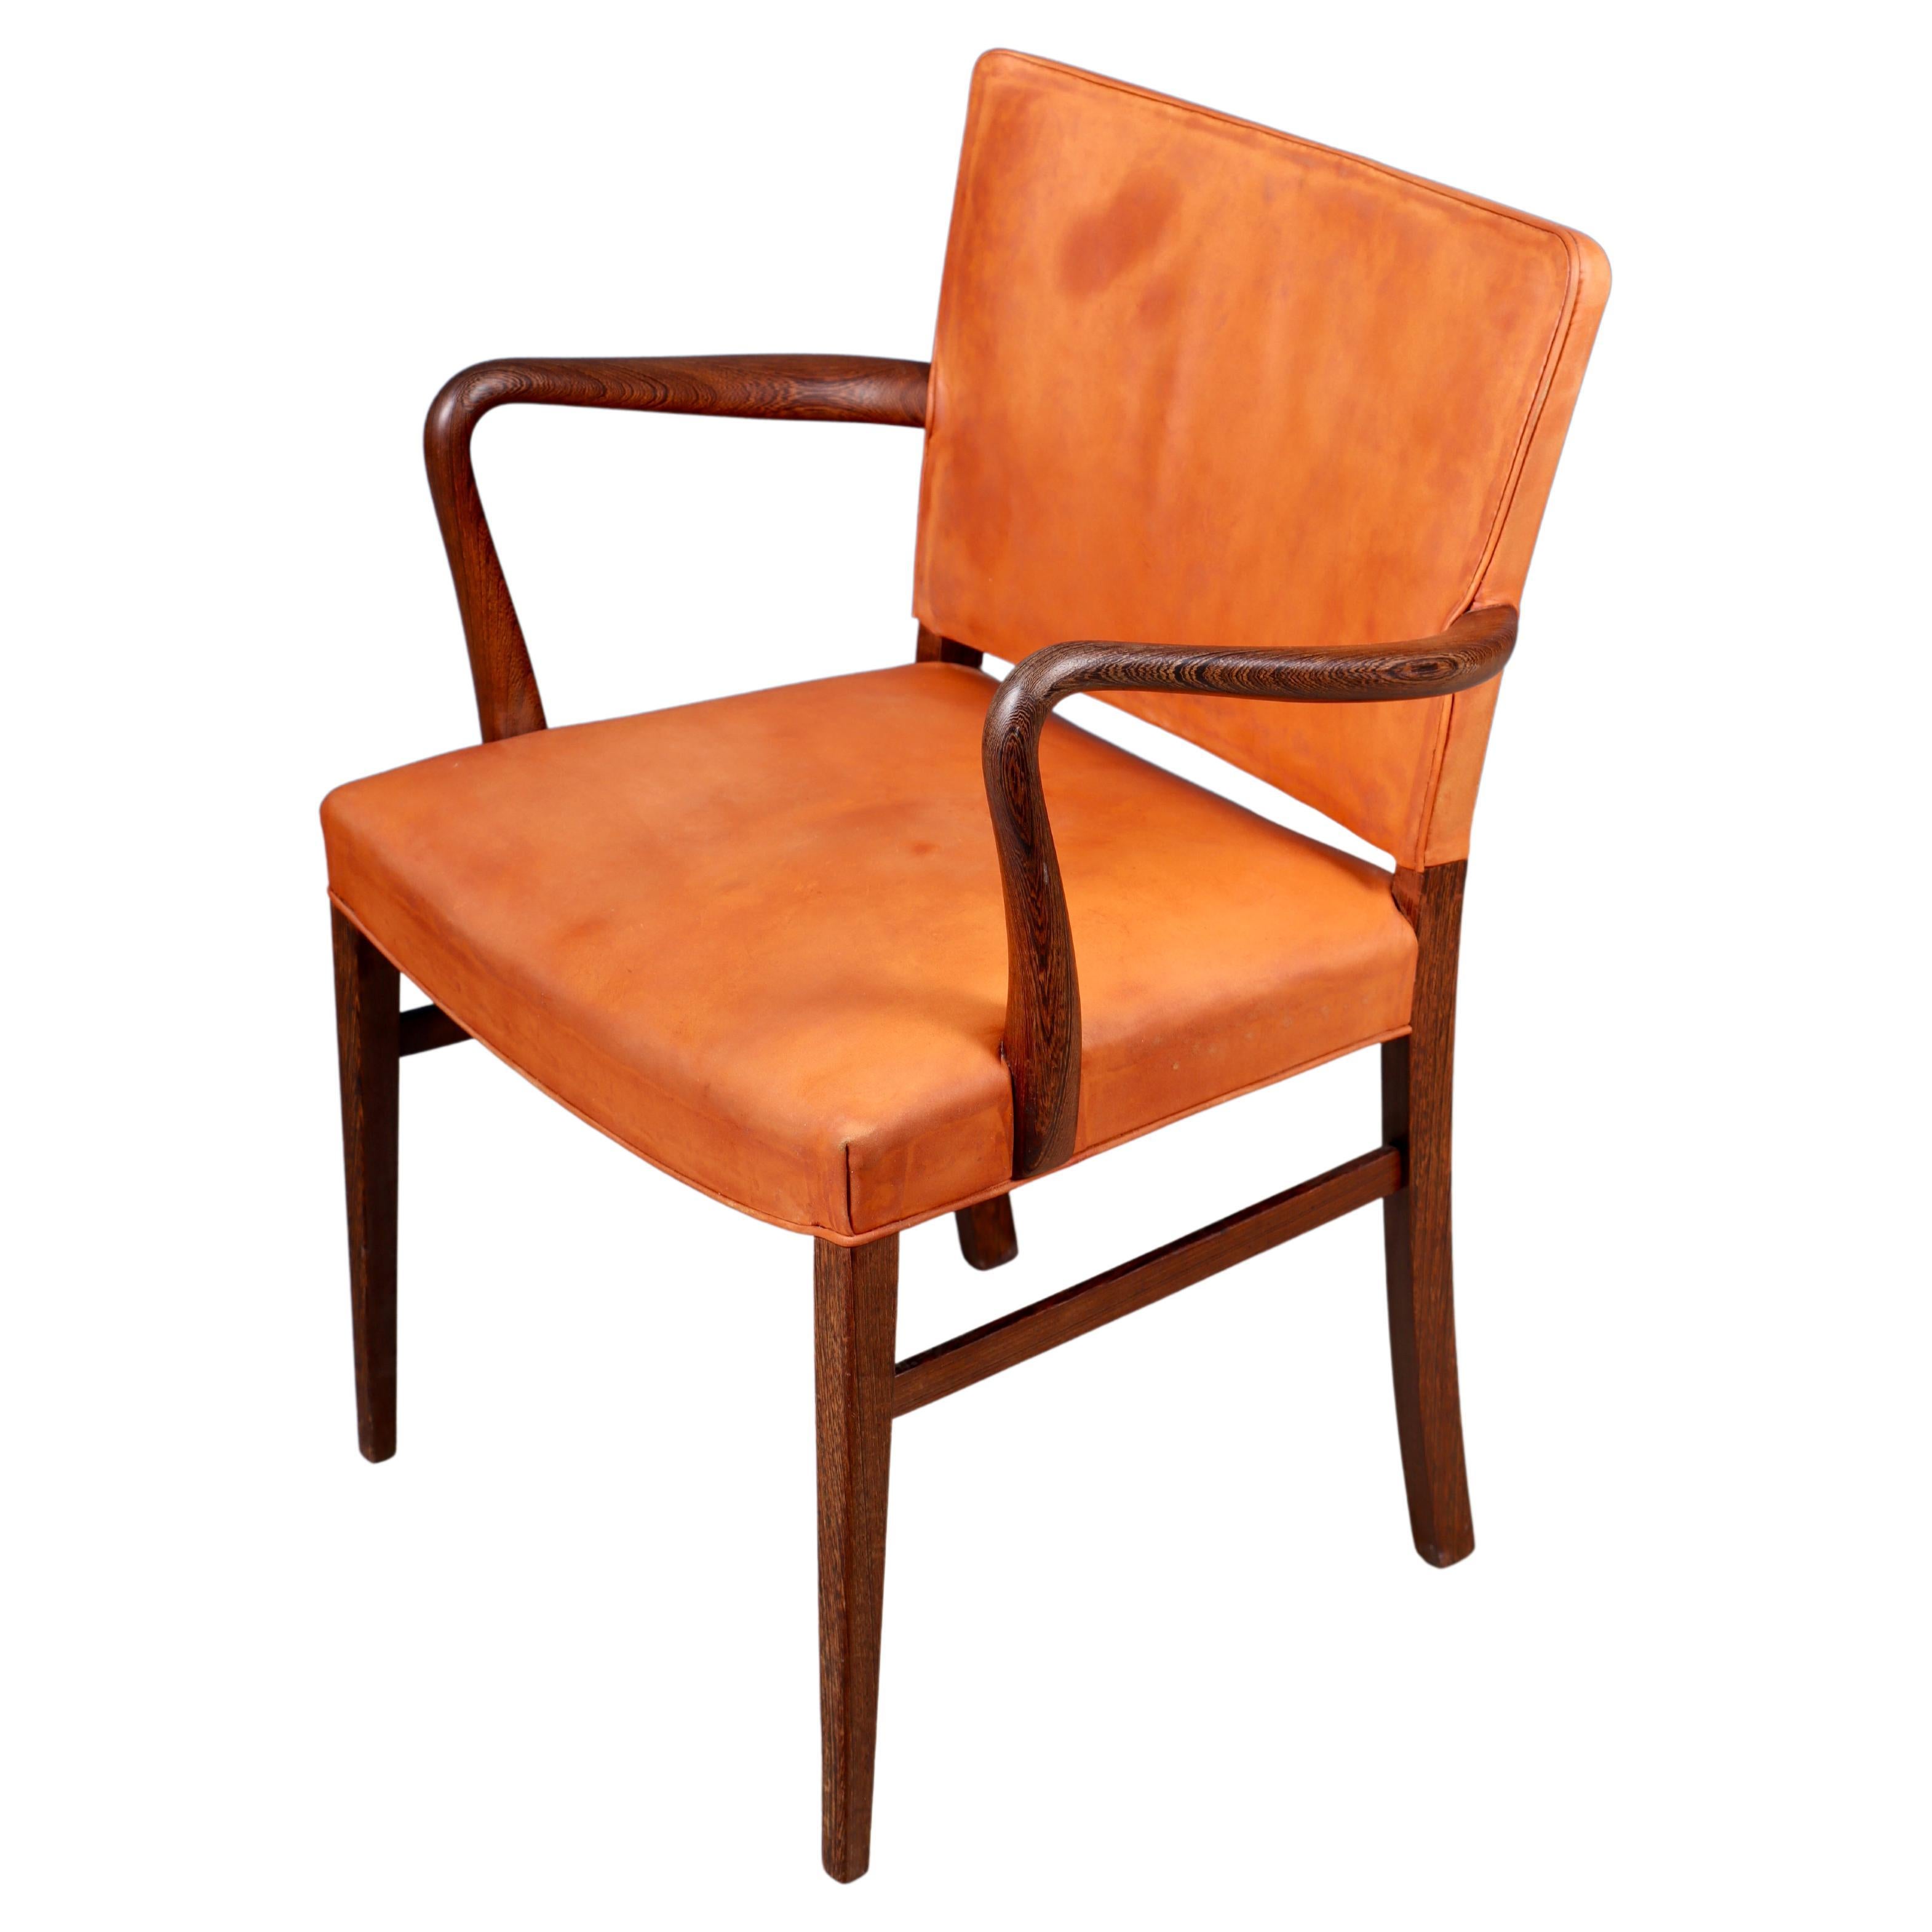 Danish armchair in patinated leather and wenge. Designed and made in Denmark, great original condition.